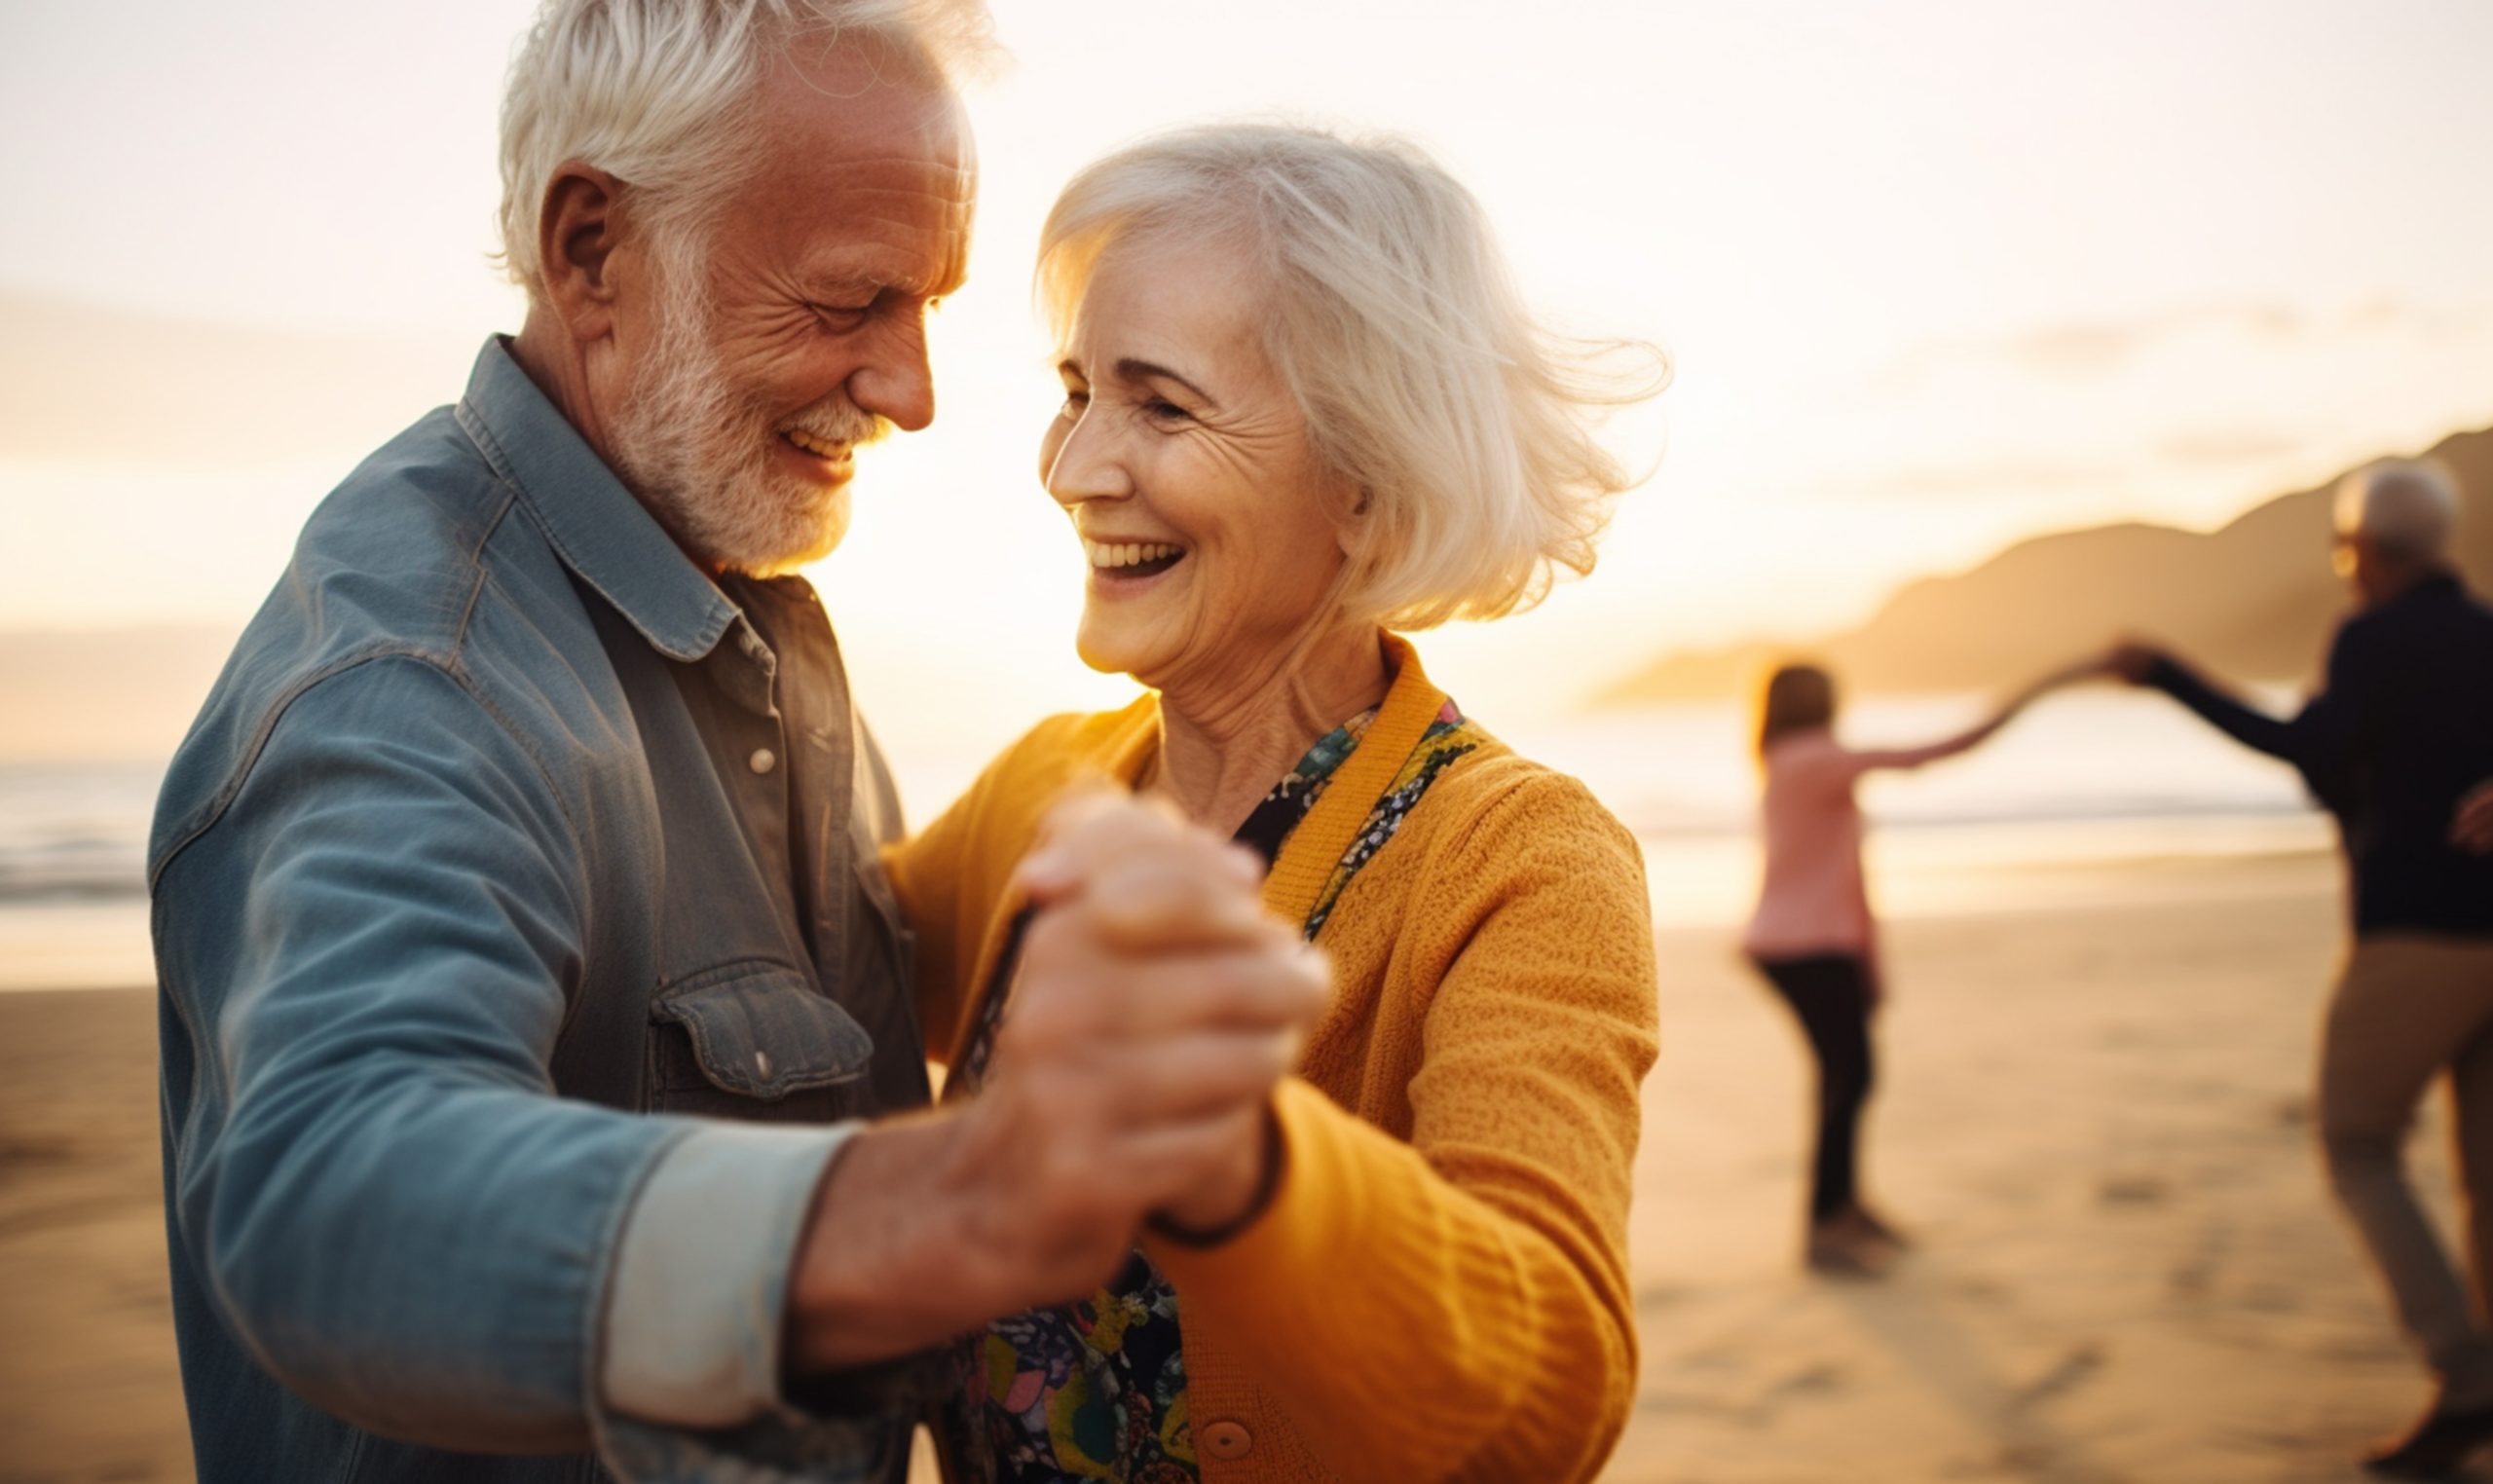 How Could a Life Settlement Help Prepare for Retirement?